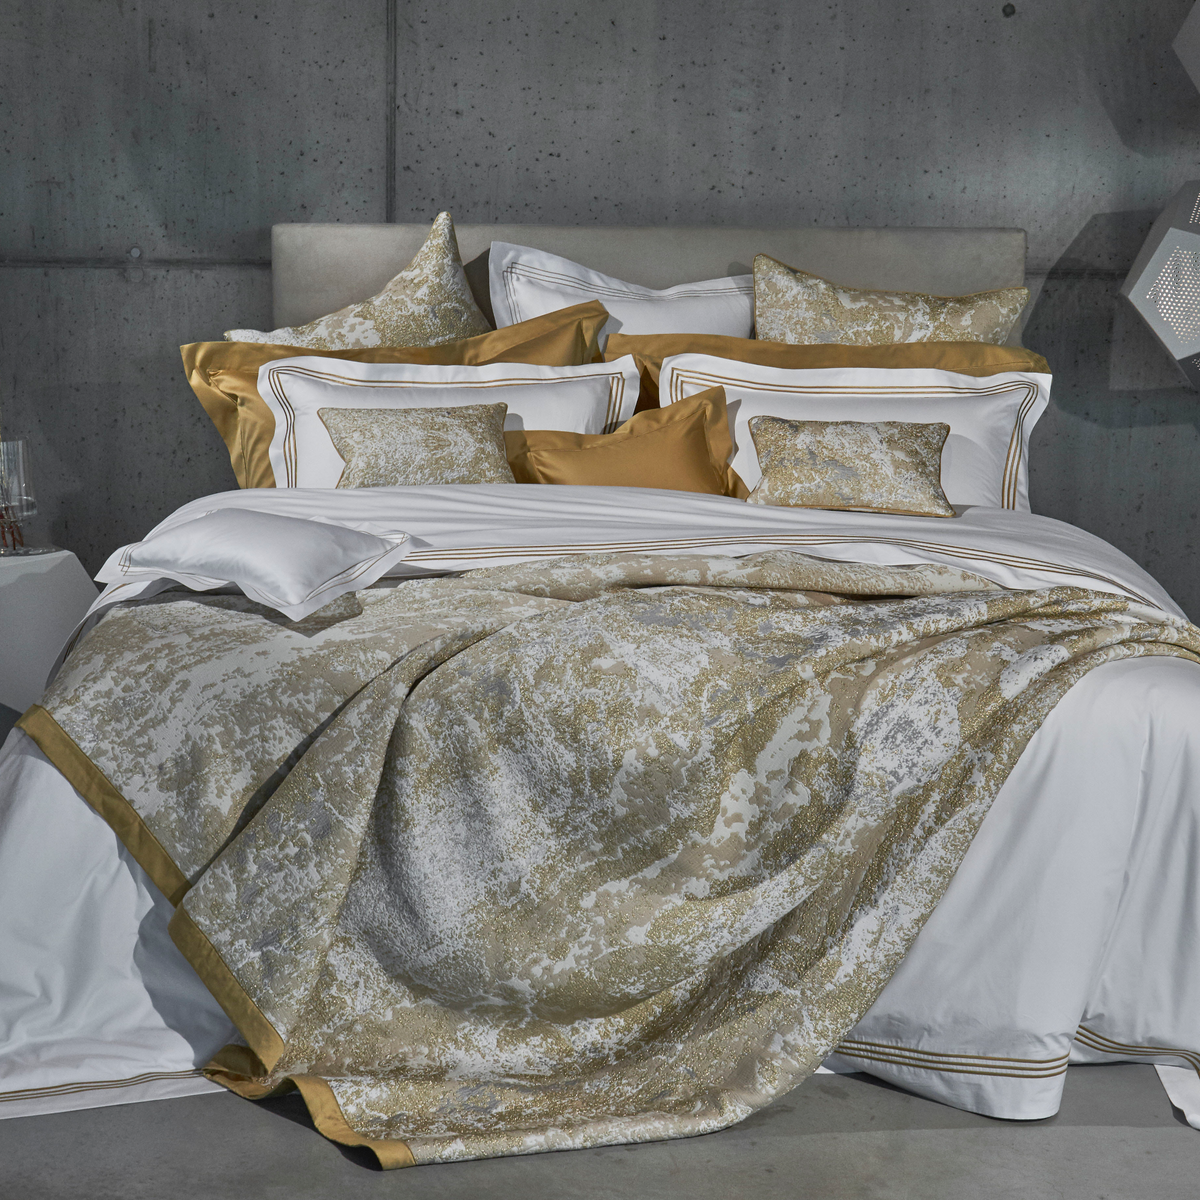 Lifestyle Shot of Full Bed in Celso de Lemos Waltz Collection in Miel Color